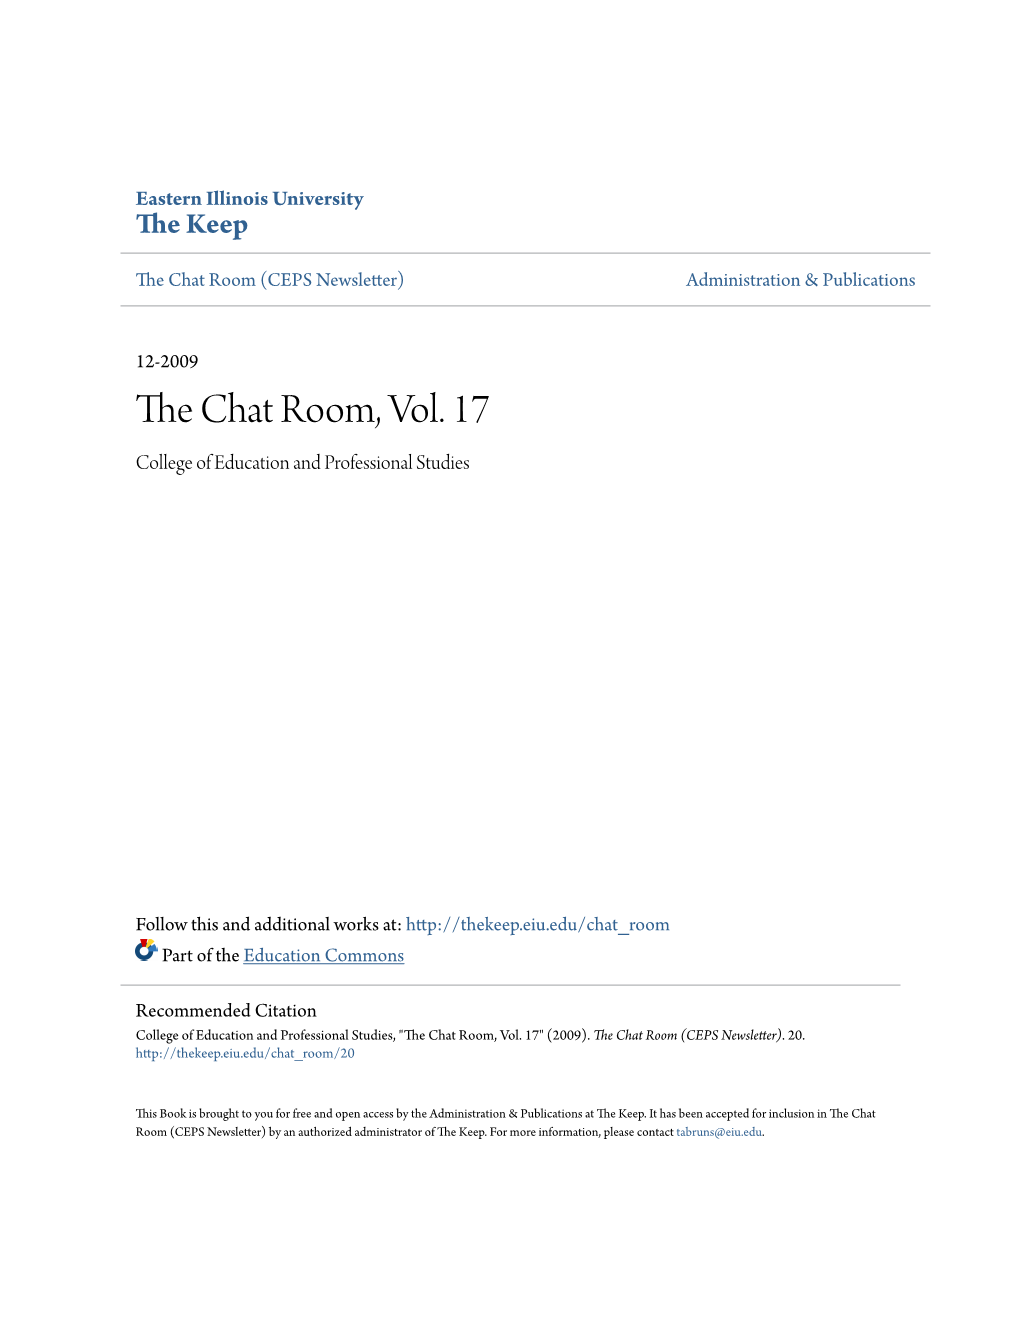 The Chat Room, Vol. 17